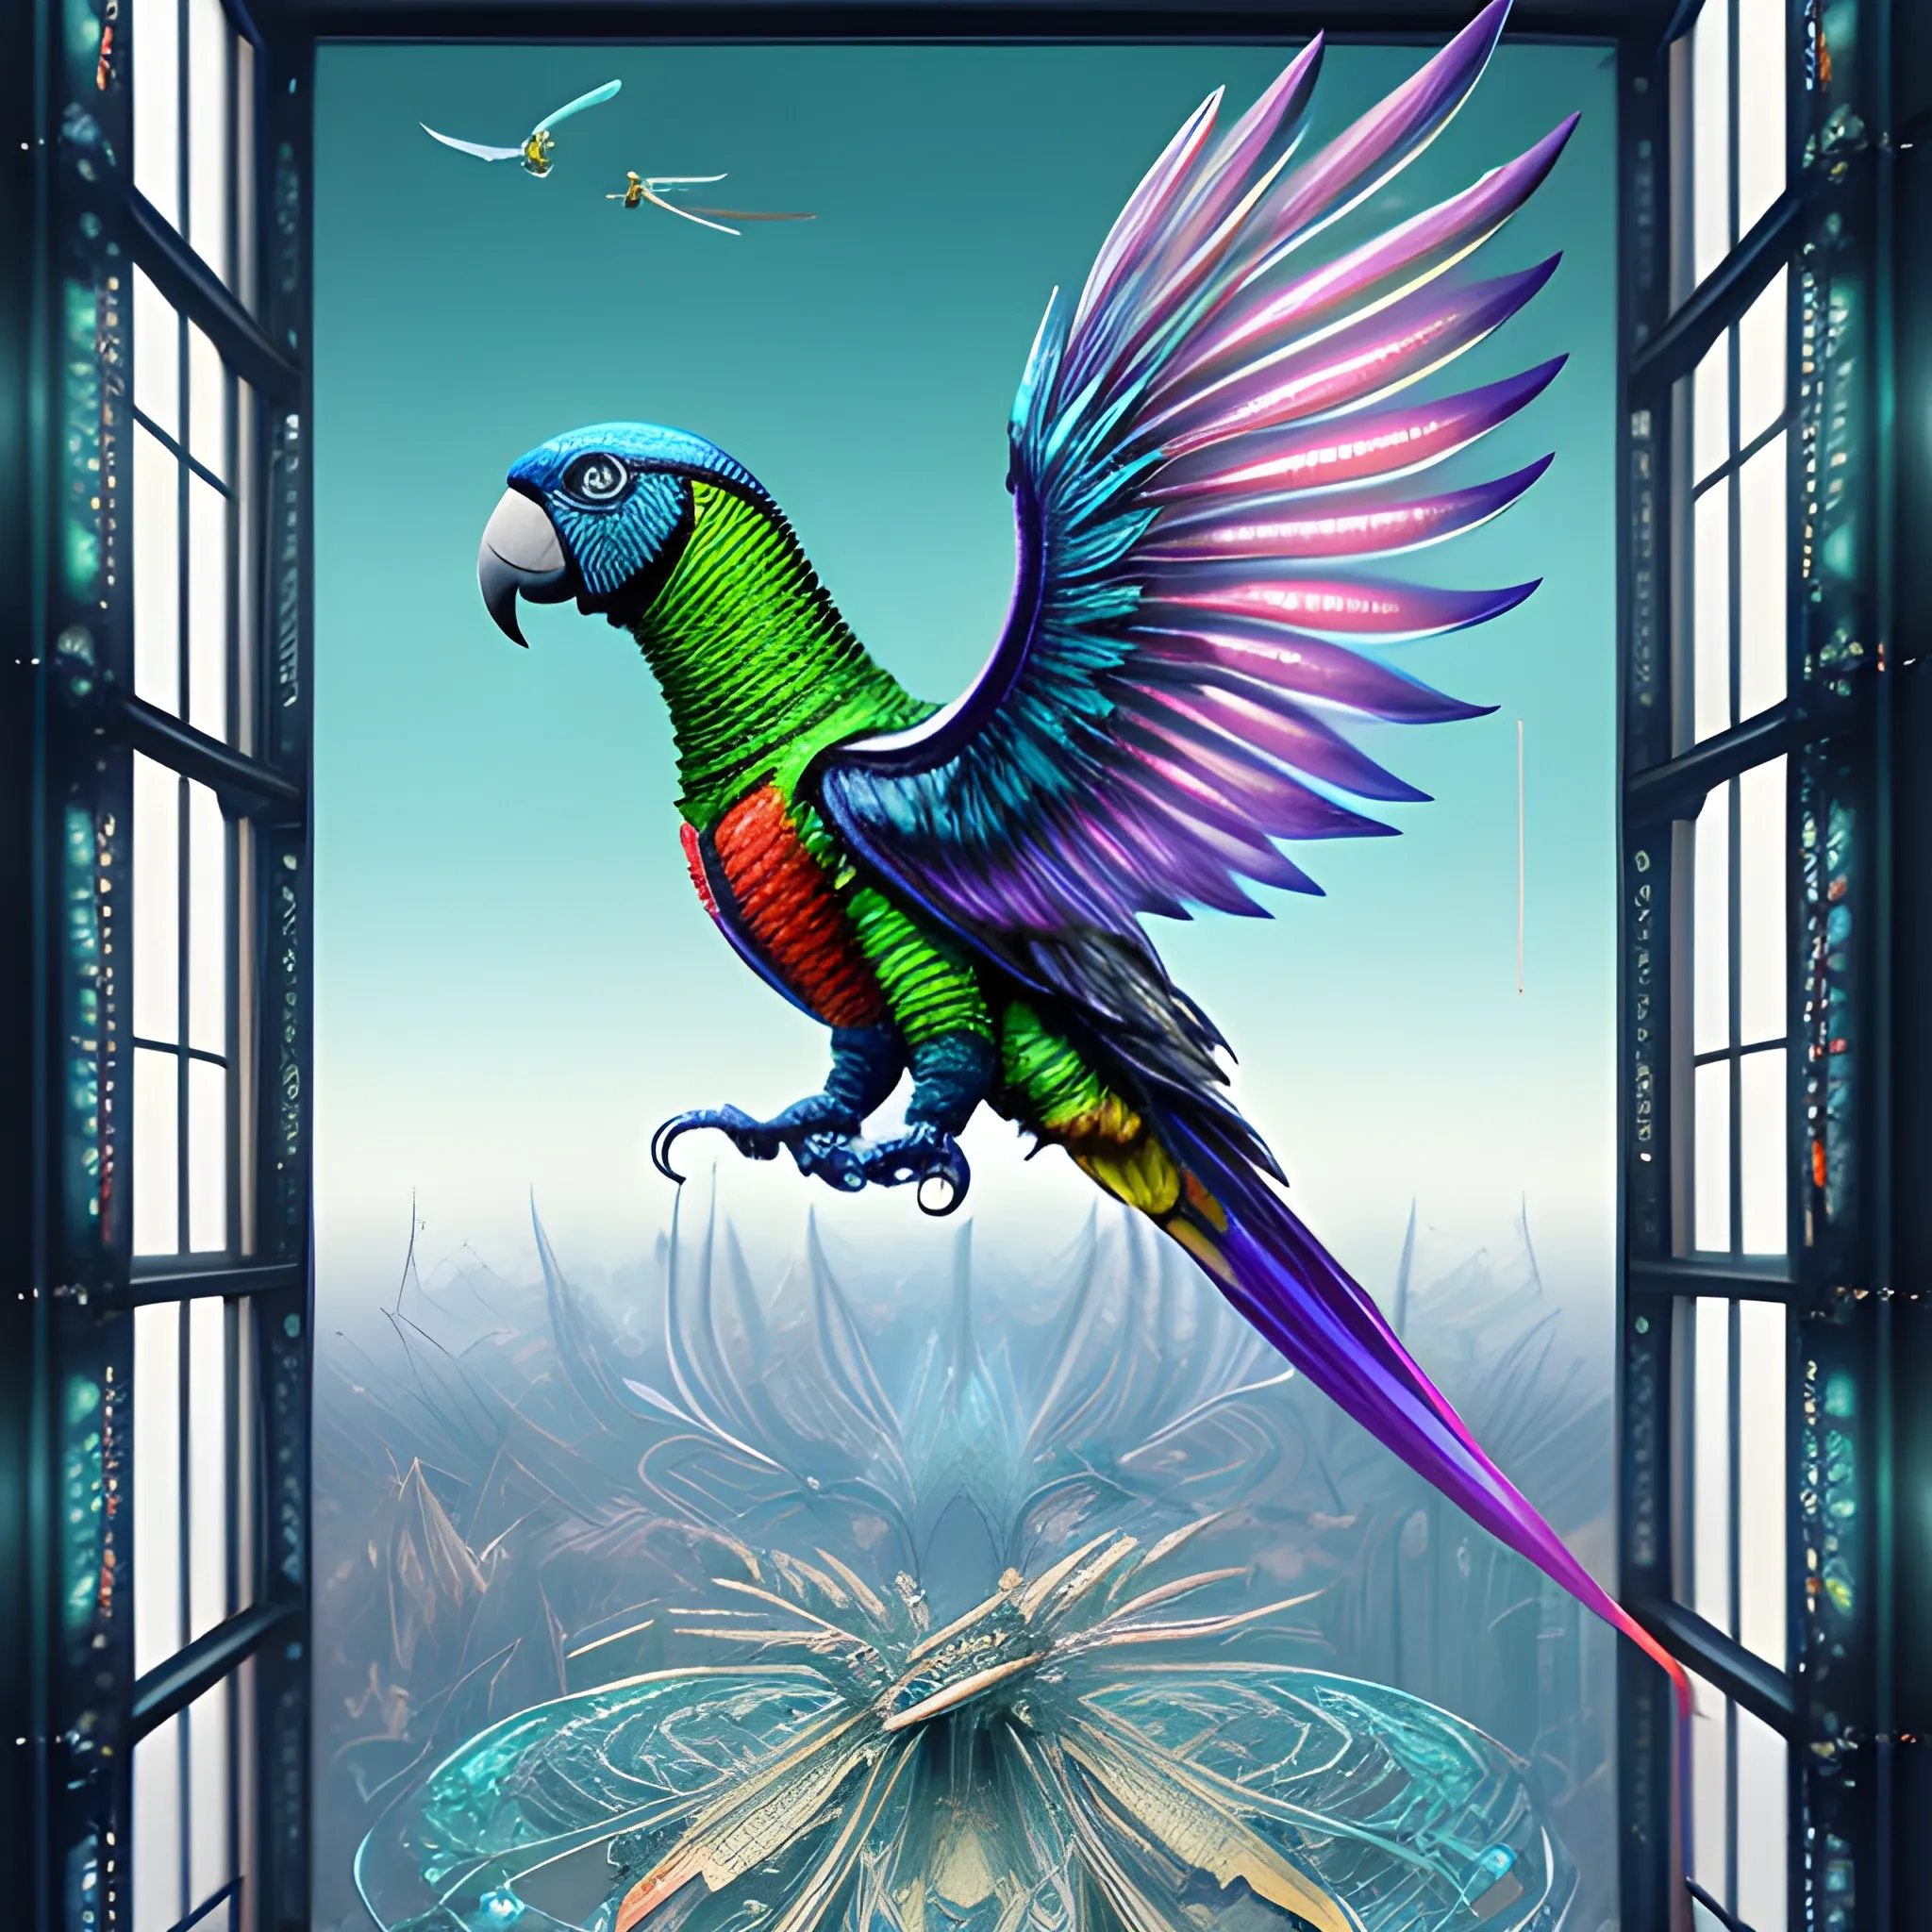 A mechanical animalistic Parrot, with transparent wings, final fantasy concept art, intricate, detailed, dramatic, art-station, view form window and sci-fi cities below, showcasing the innovation of anti-gravity racing. The poster features futuristic colors and detailed textures to convey innovation and adrenaline, Trippy